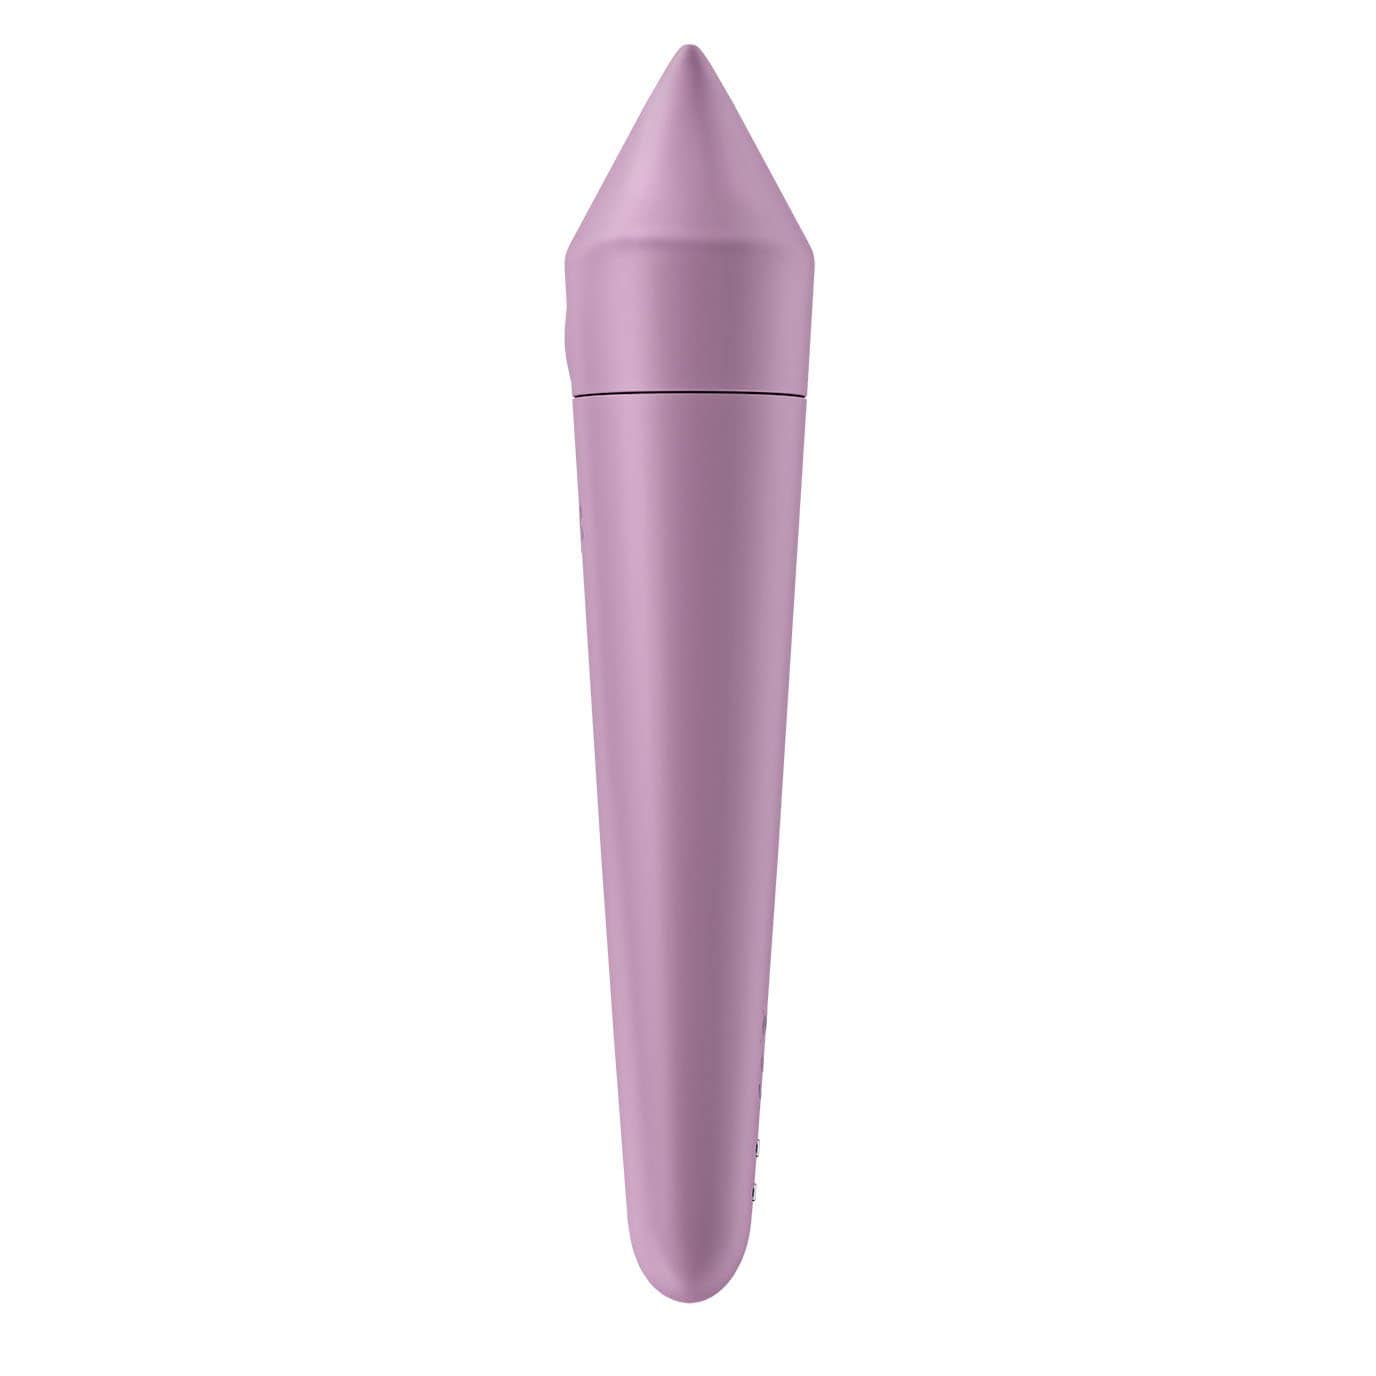 Satisfyer - Ultra Power Bullet 8 Vibrator with Bluetooth and App (Lilac) Bullet (Vibration) Rechargeable 4061504007755 CherryAffairs